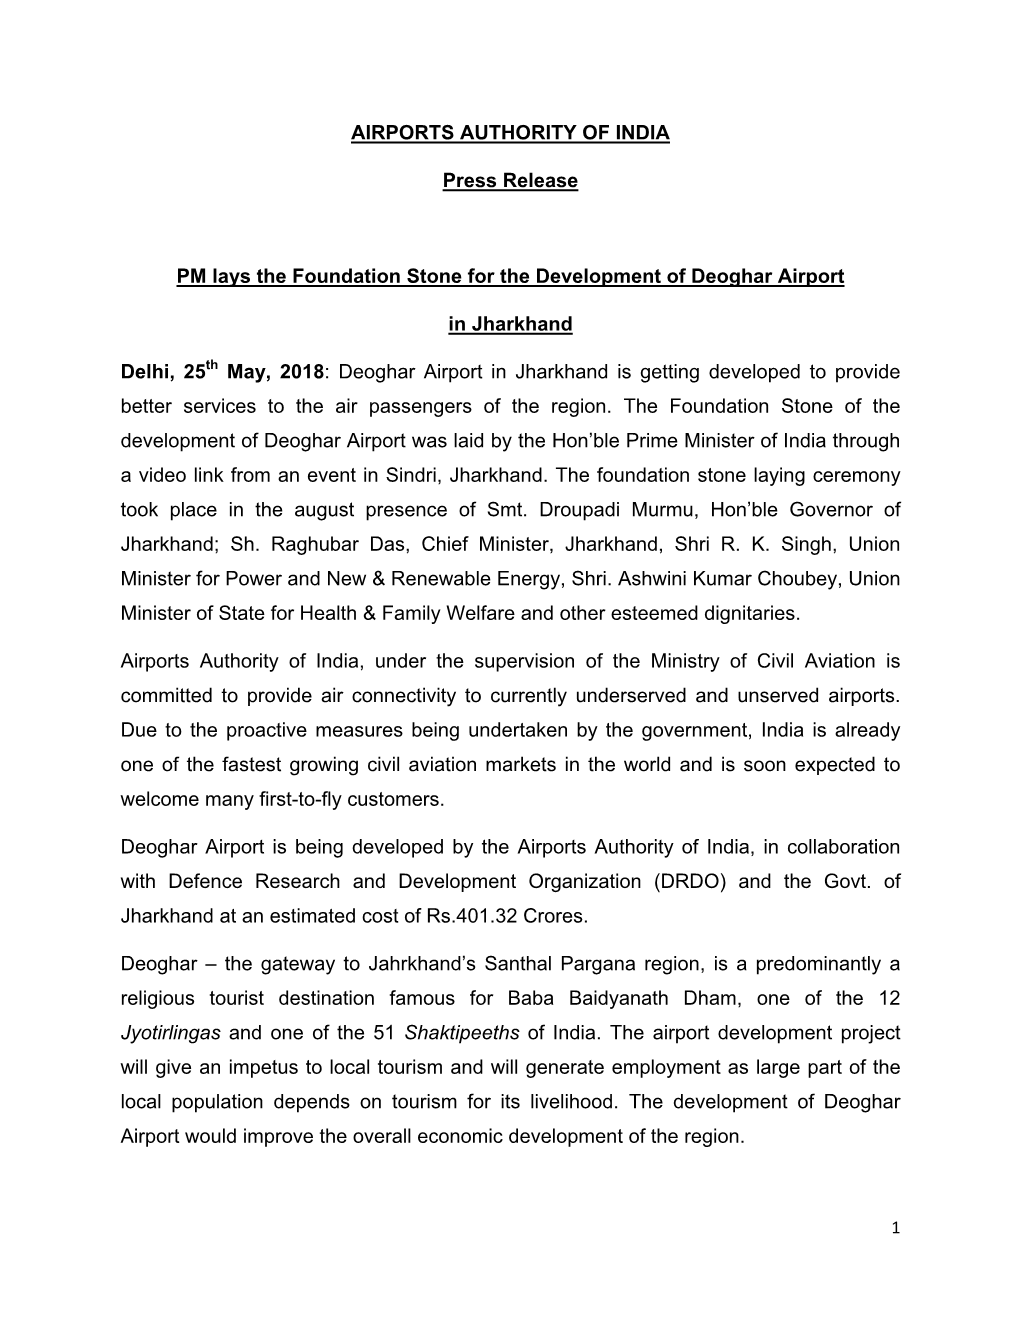 AIRPORTS AUTHORITY of INDIA Press Release PM Lays The